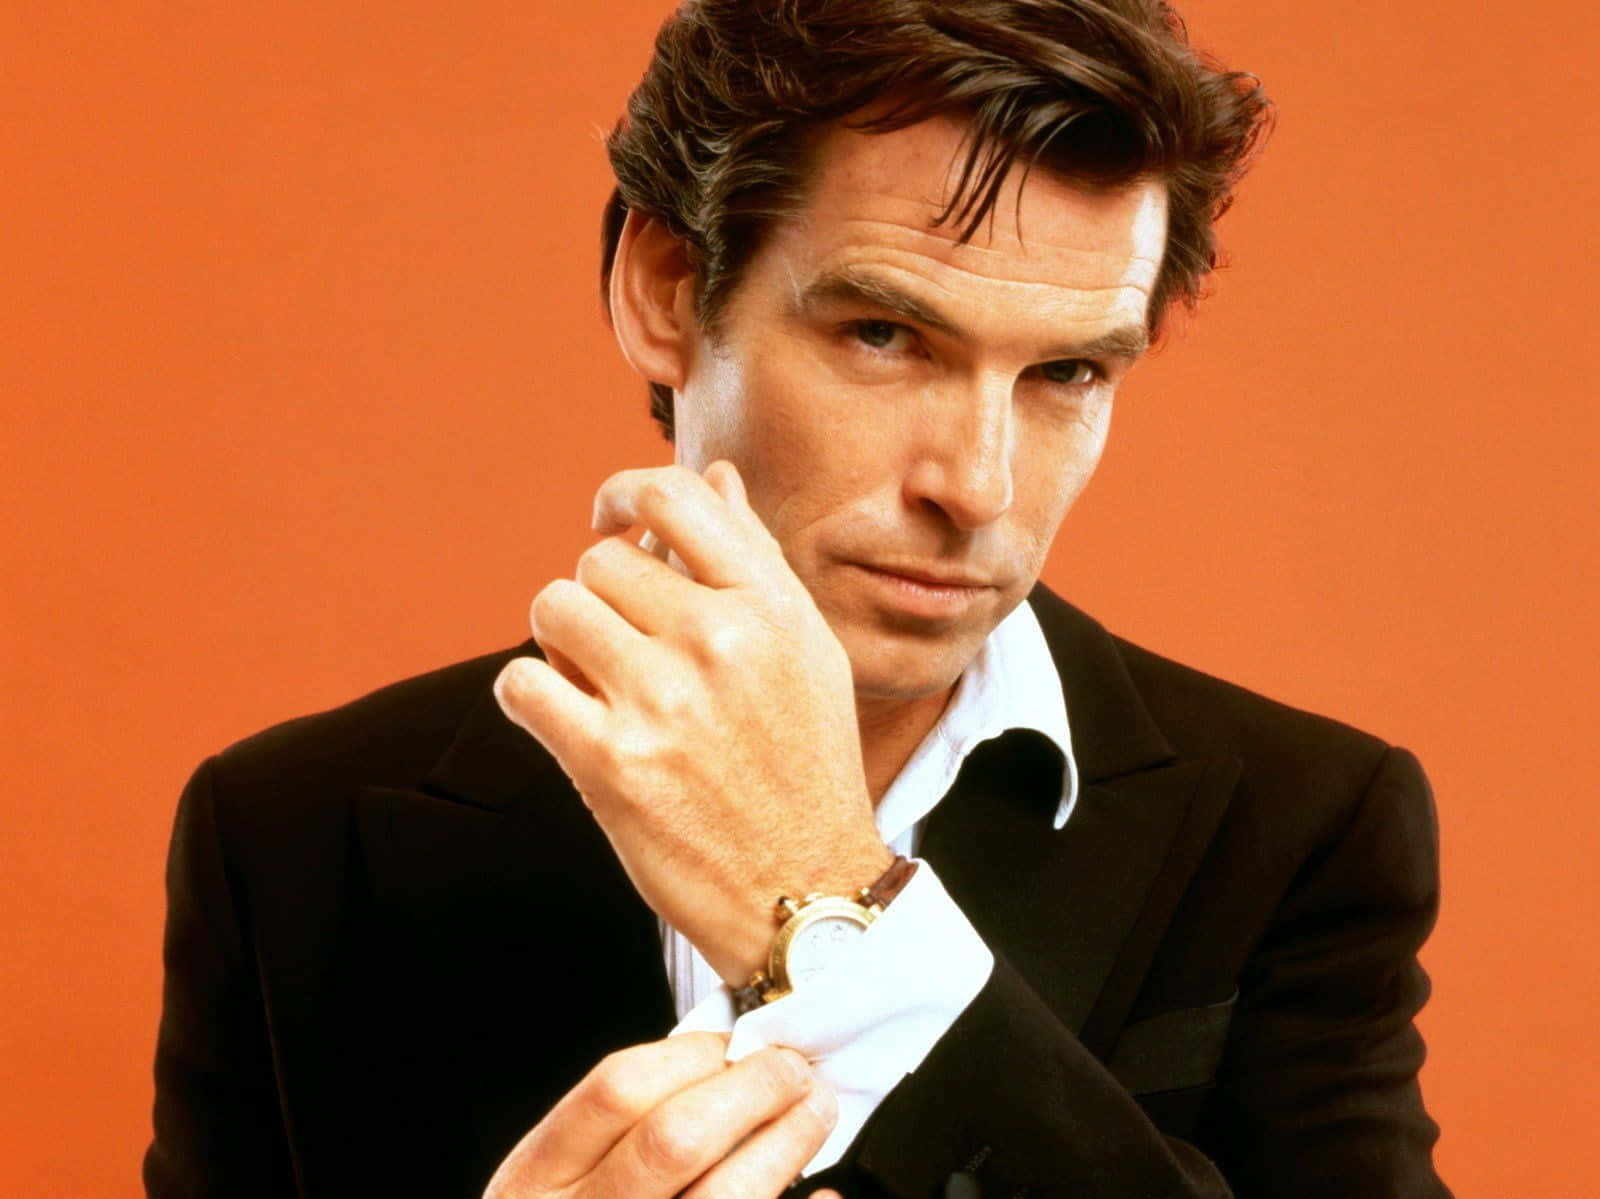 Pierce Brosnan In The Movie The World Is Not Enough Wallpaper